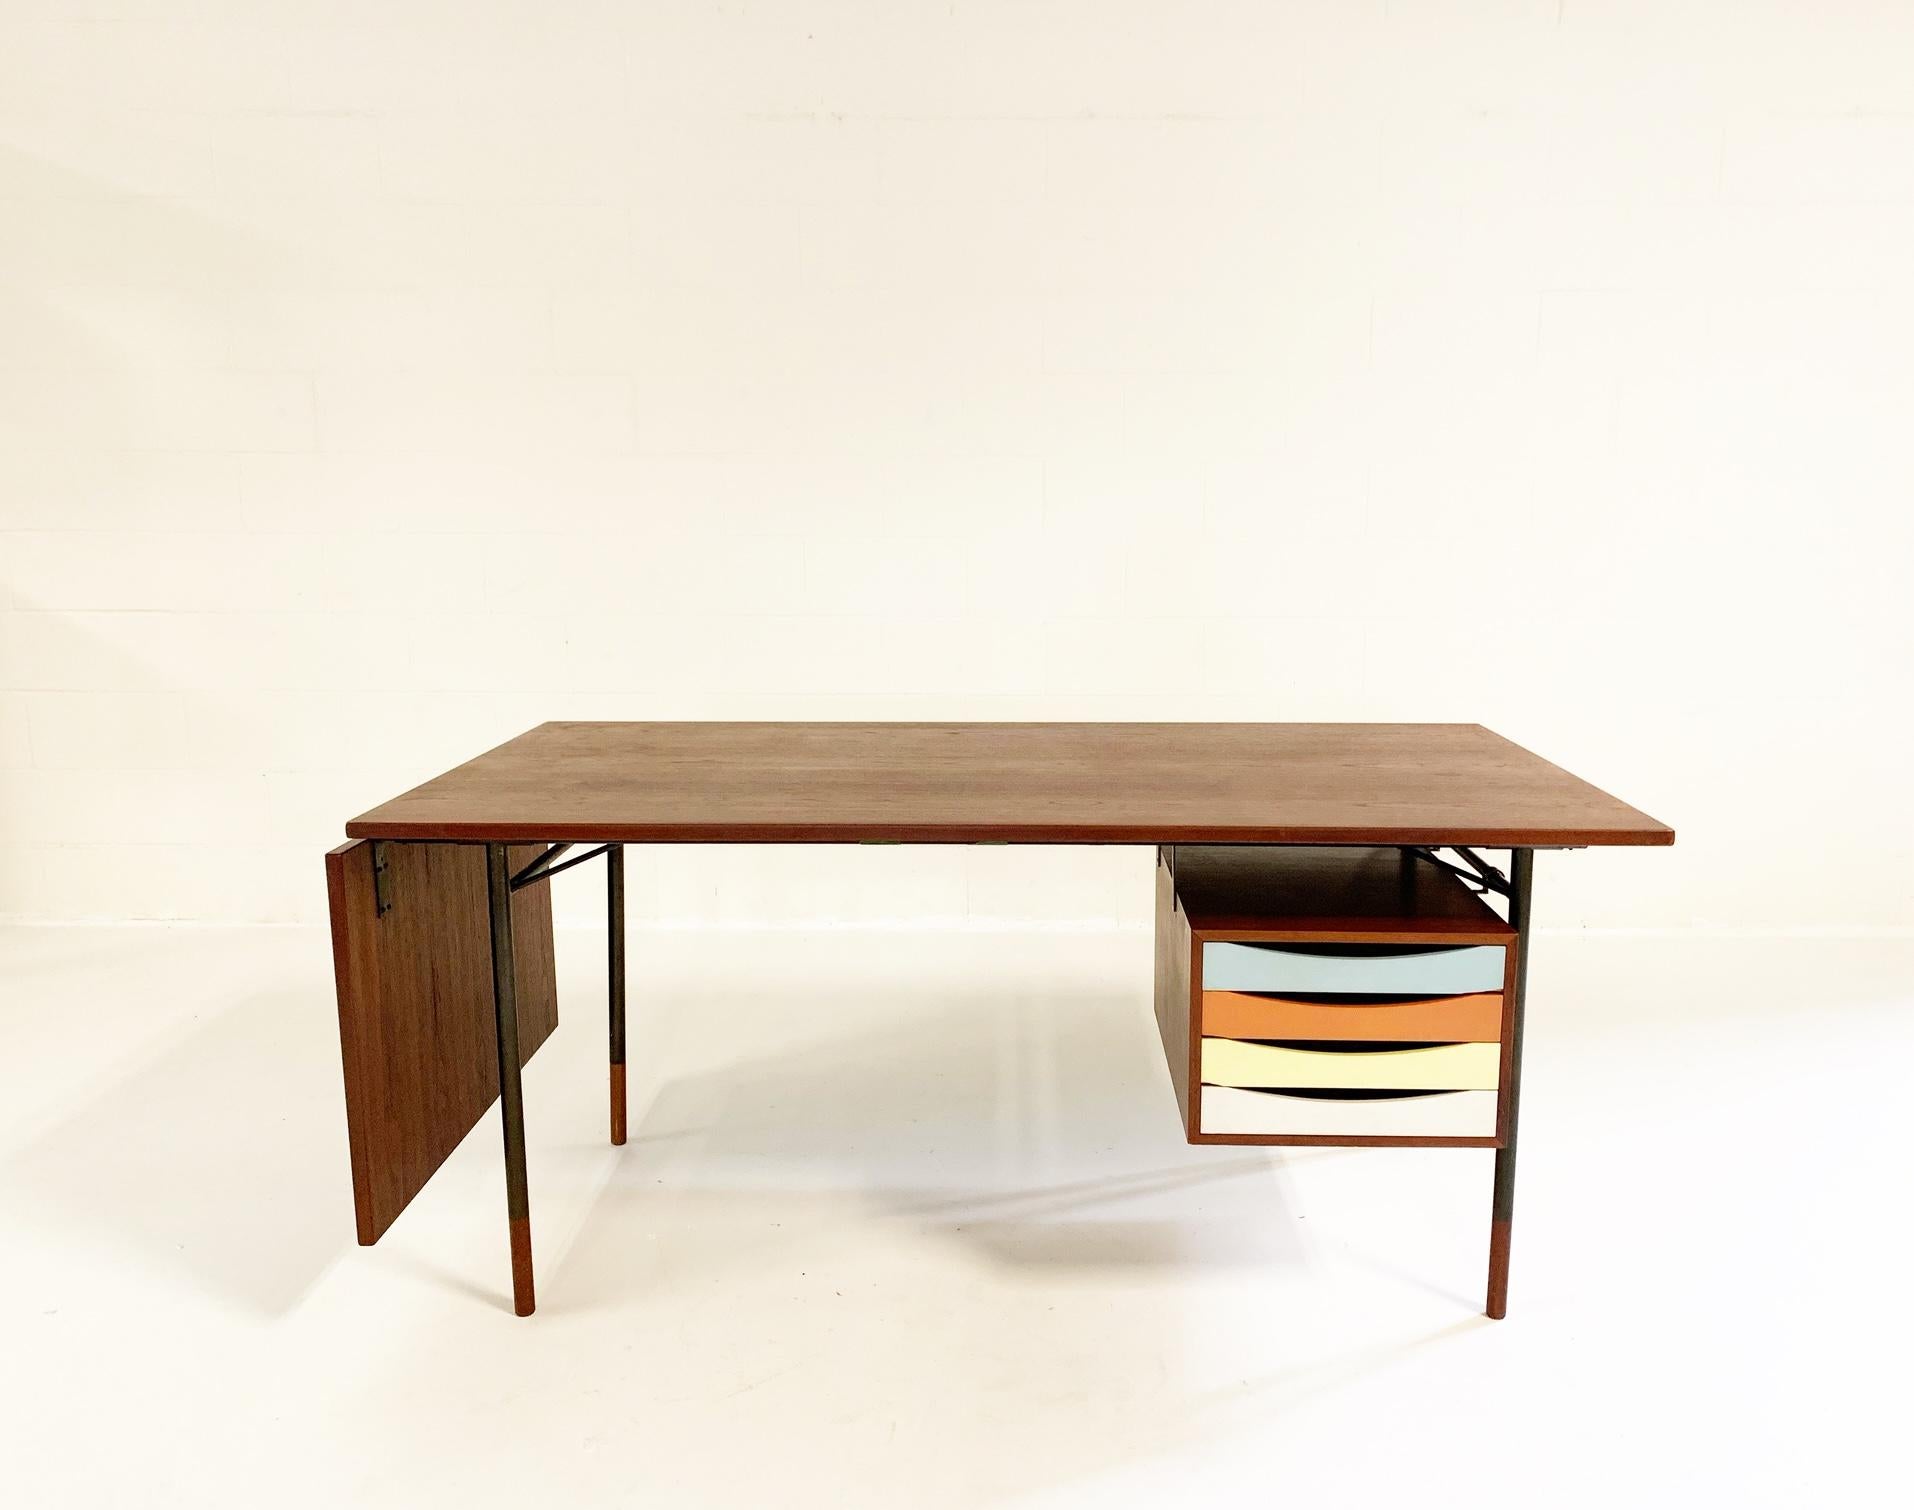 This a wonderful example of a Finn Juhl freestanding teak writing desk with detachable 20.25 inch flip-down leaf, the table measures 88.25 inches when fully extended. The drawer section has four polychrome lacquered drawers. The desk features an